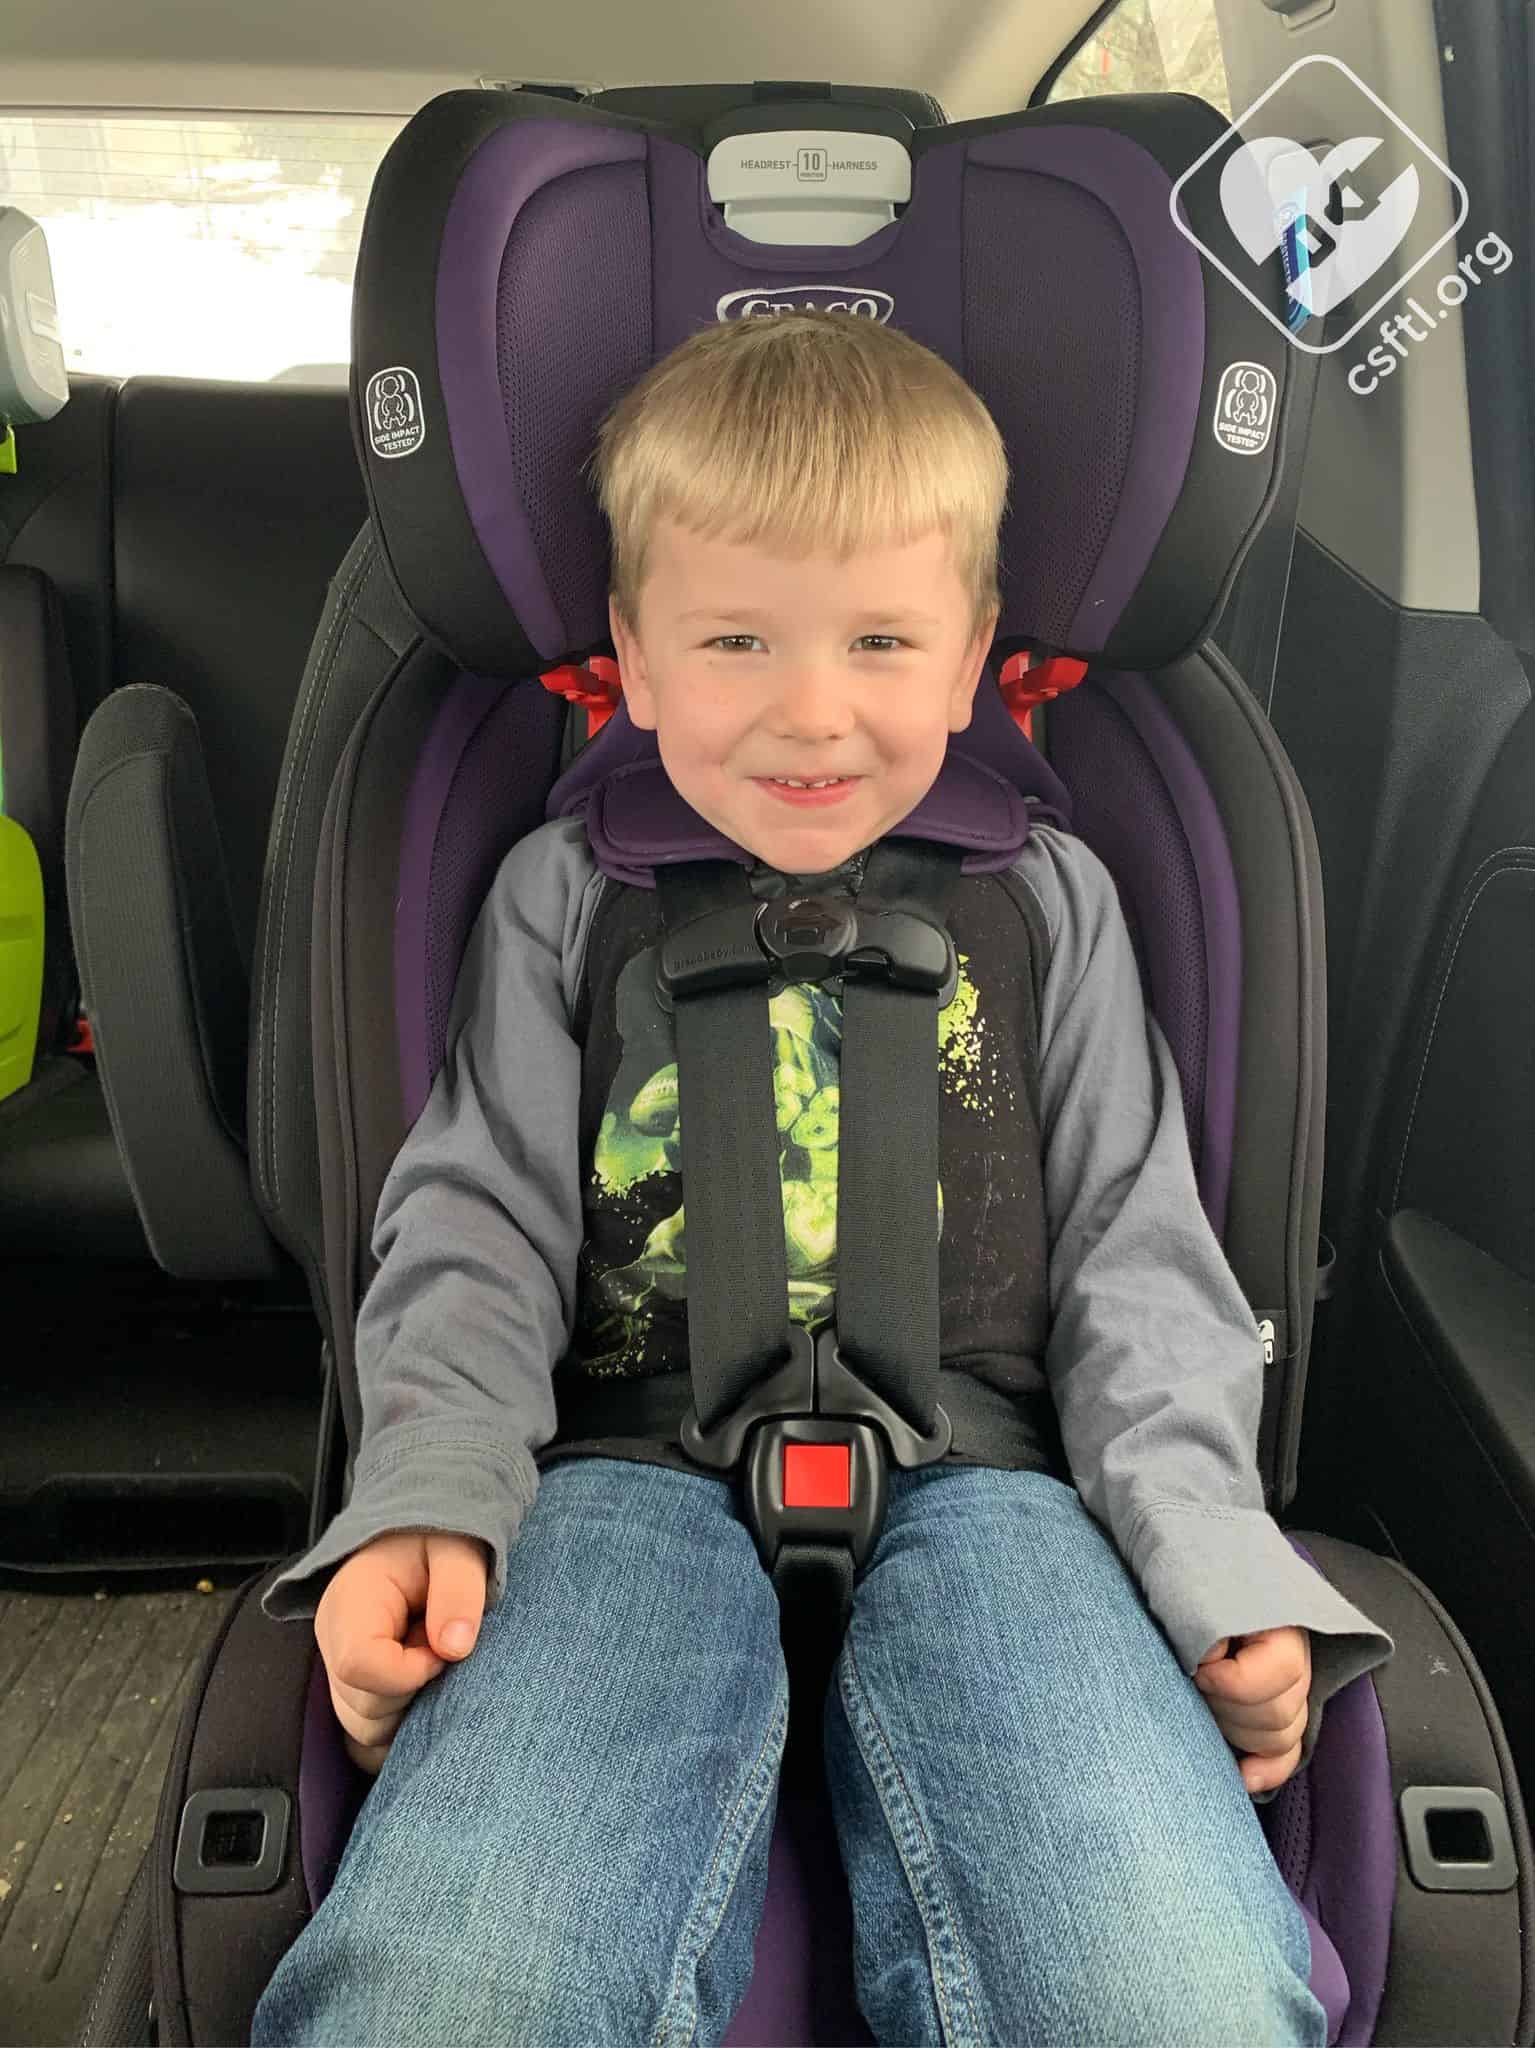 Graco SlimFit LX 3in1 Car Seat Review 